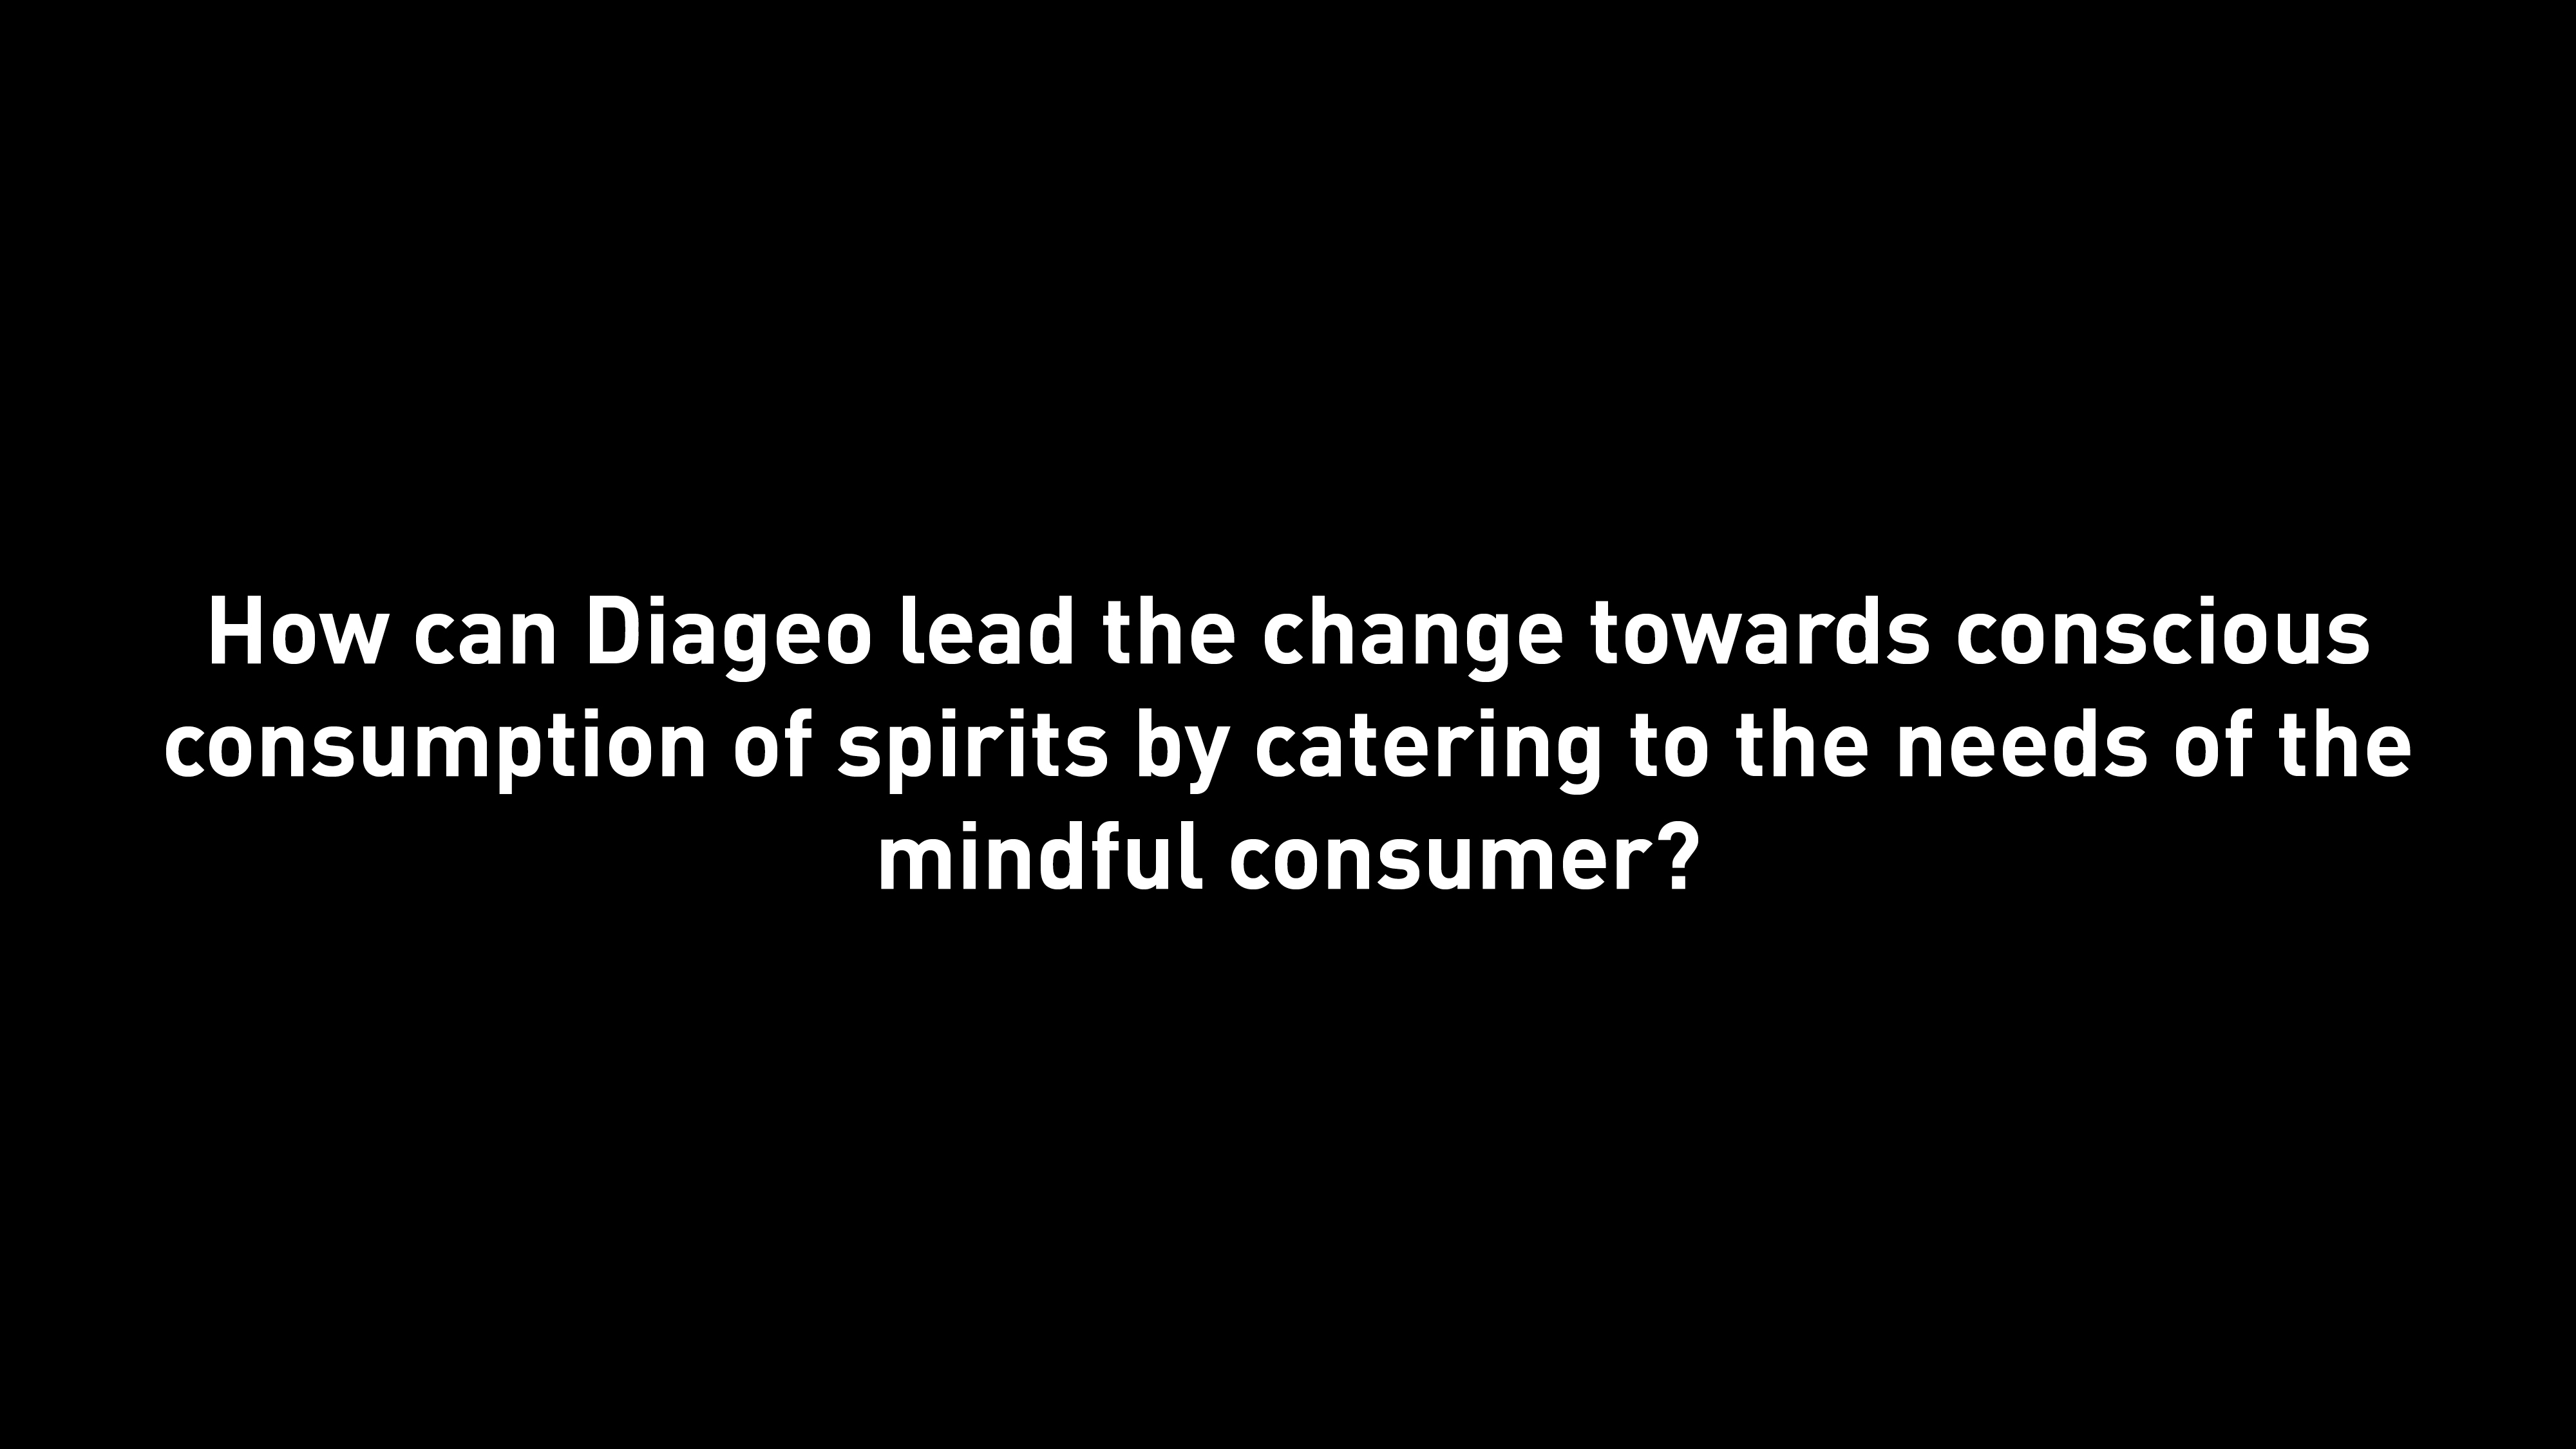 Our mission statement: 'How can Diageo lead the change towards conscious consumption of spirits by catering to the needs of the mindful consumer'